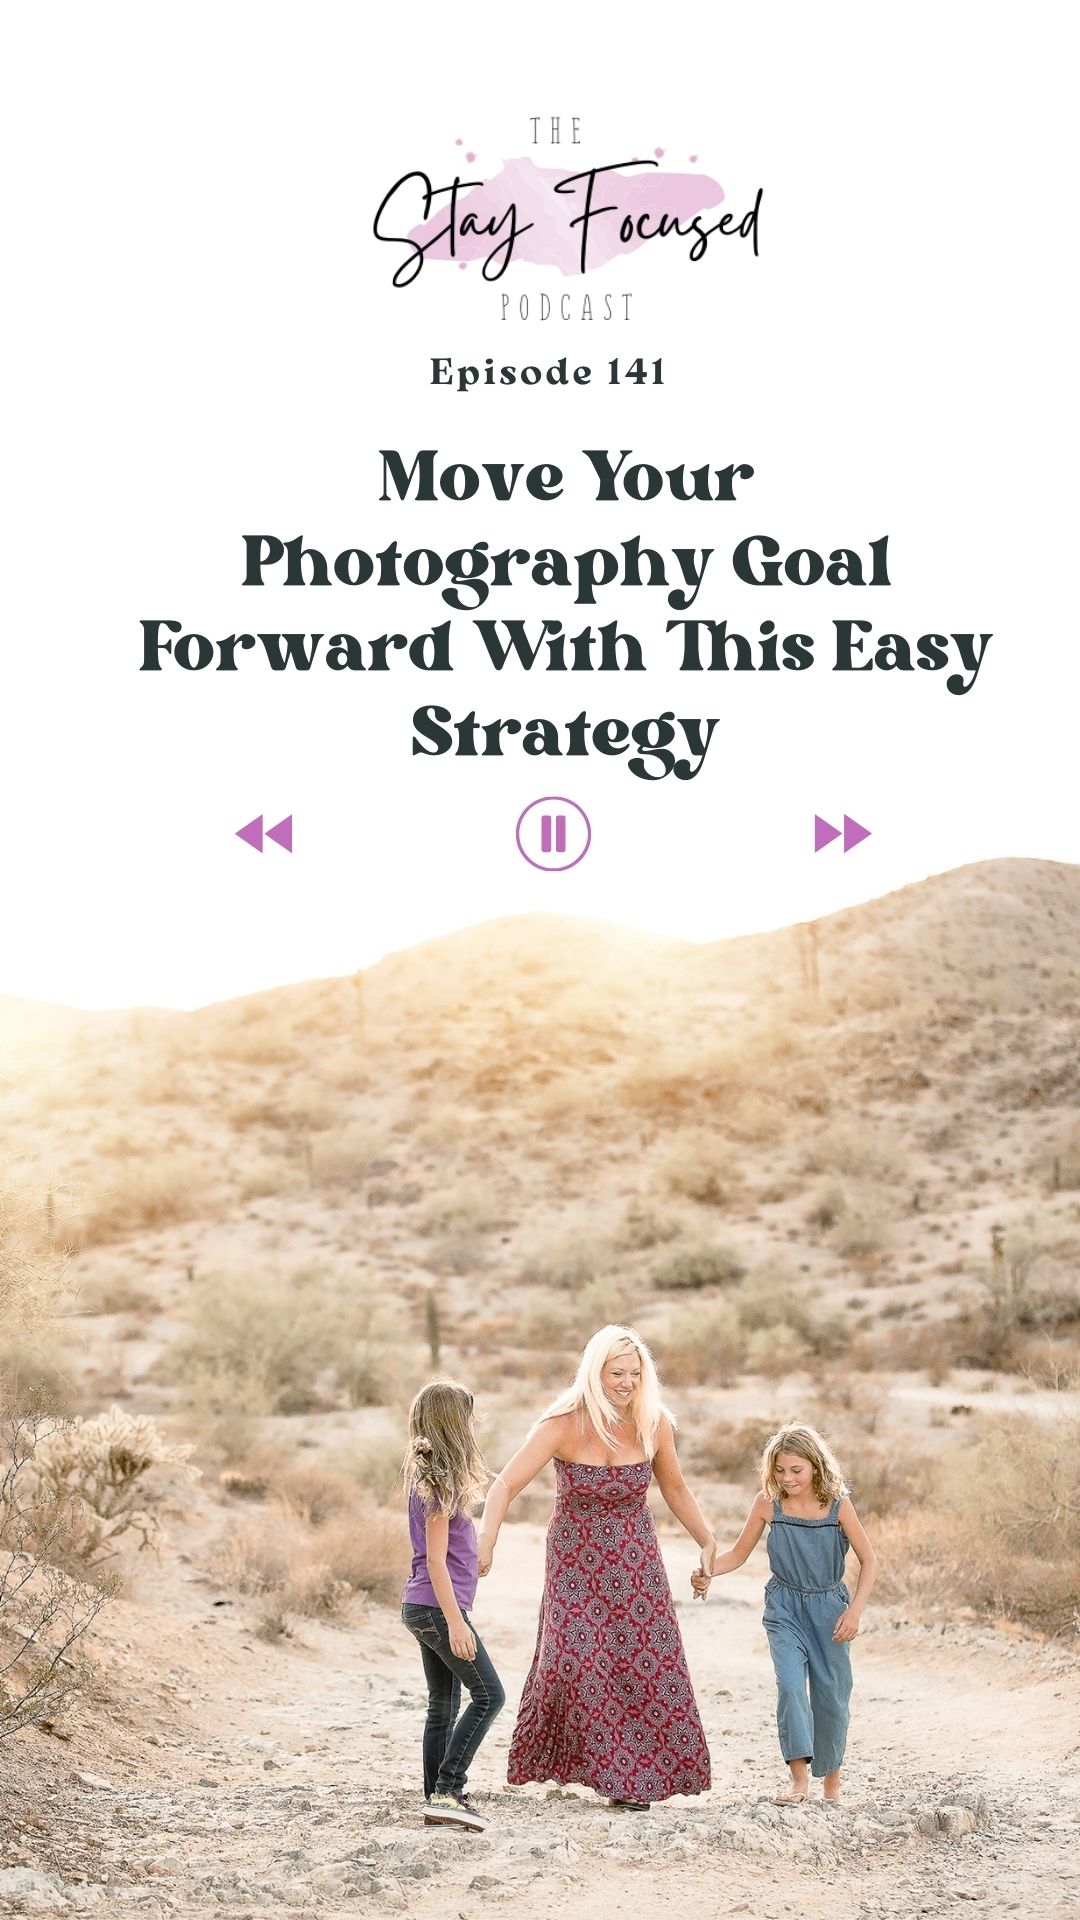 Learn photography and move forward with all your goals.  This strategy will help you see results faster!